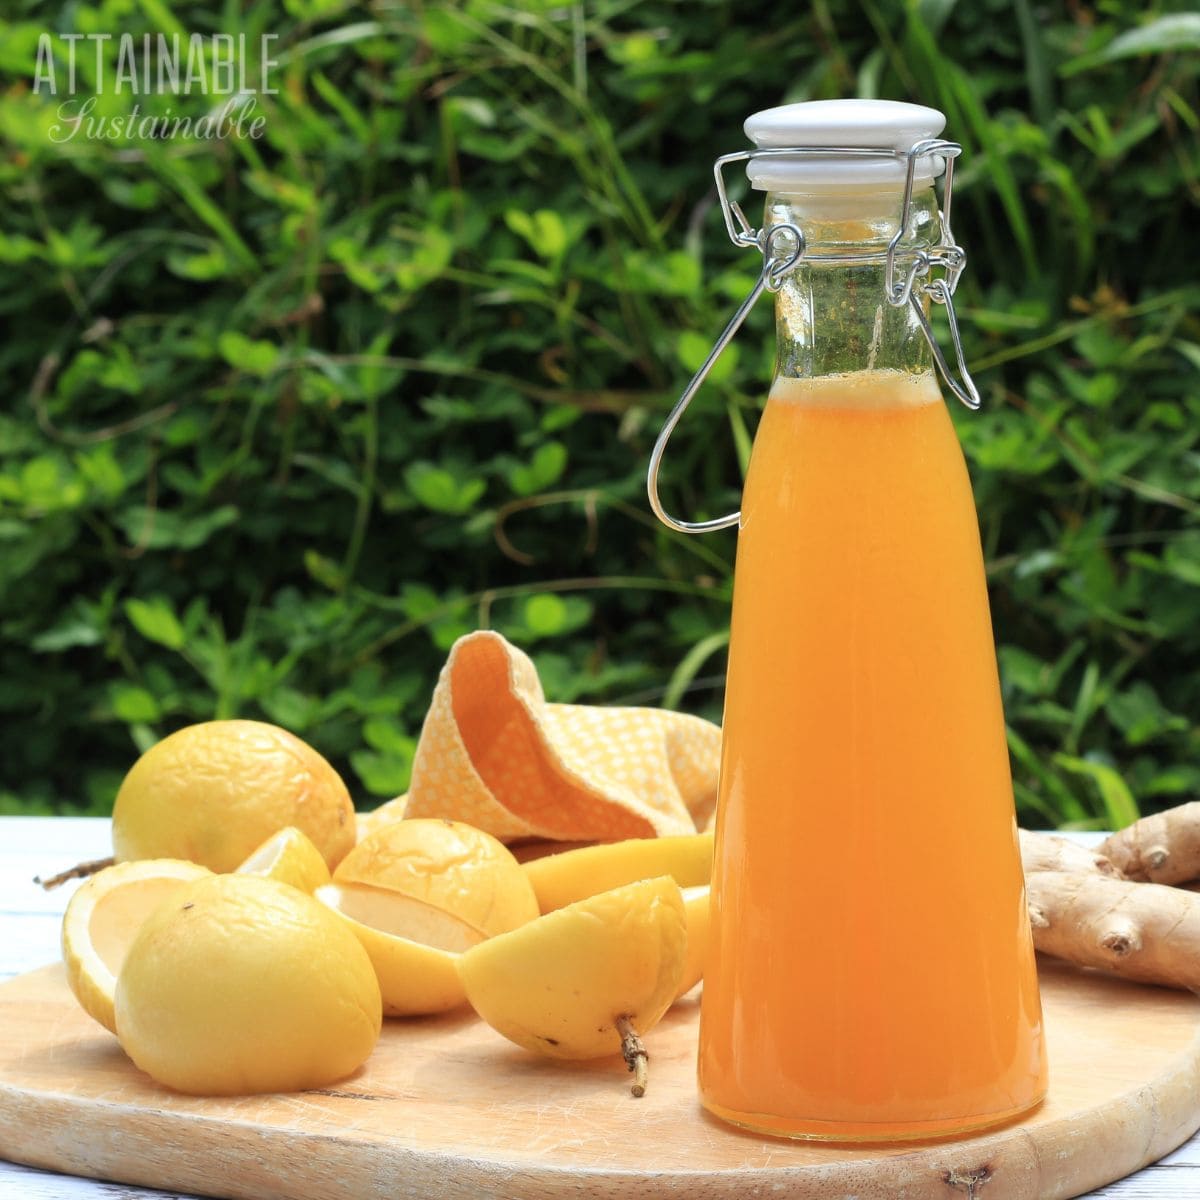 Orange colored liquid in a swingtop bottle with lilikoi rinds behind.